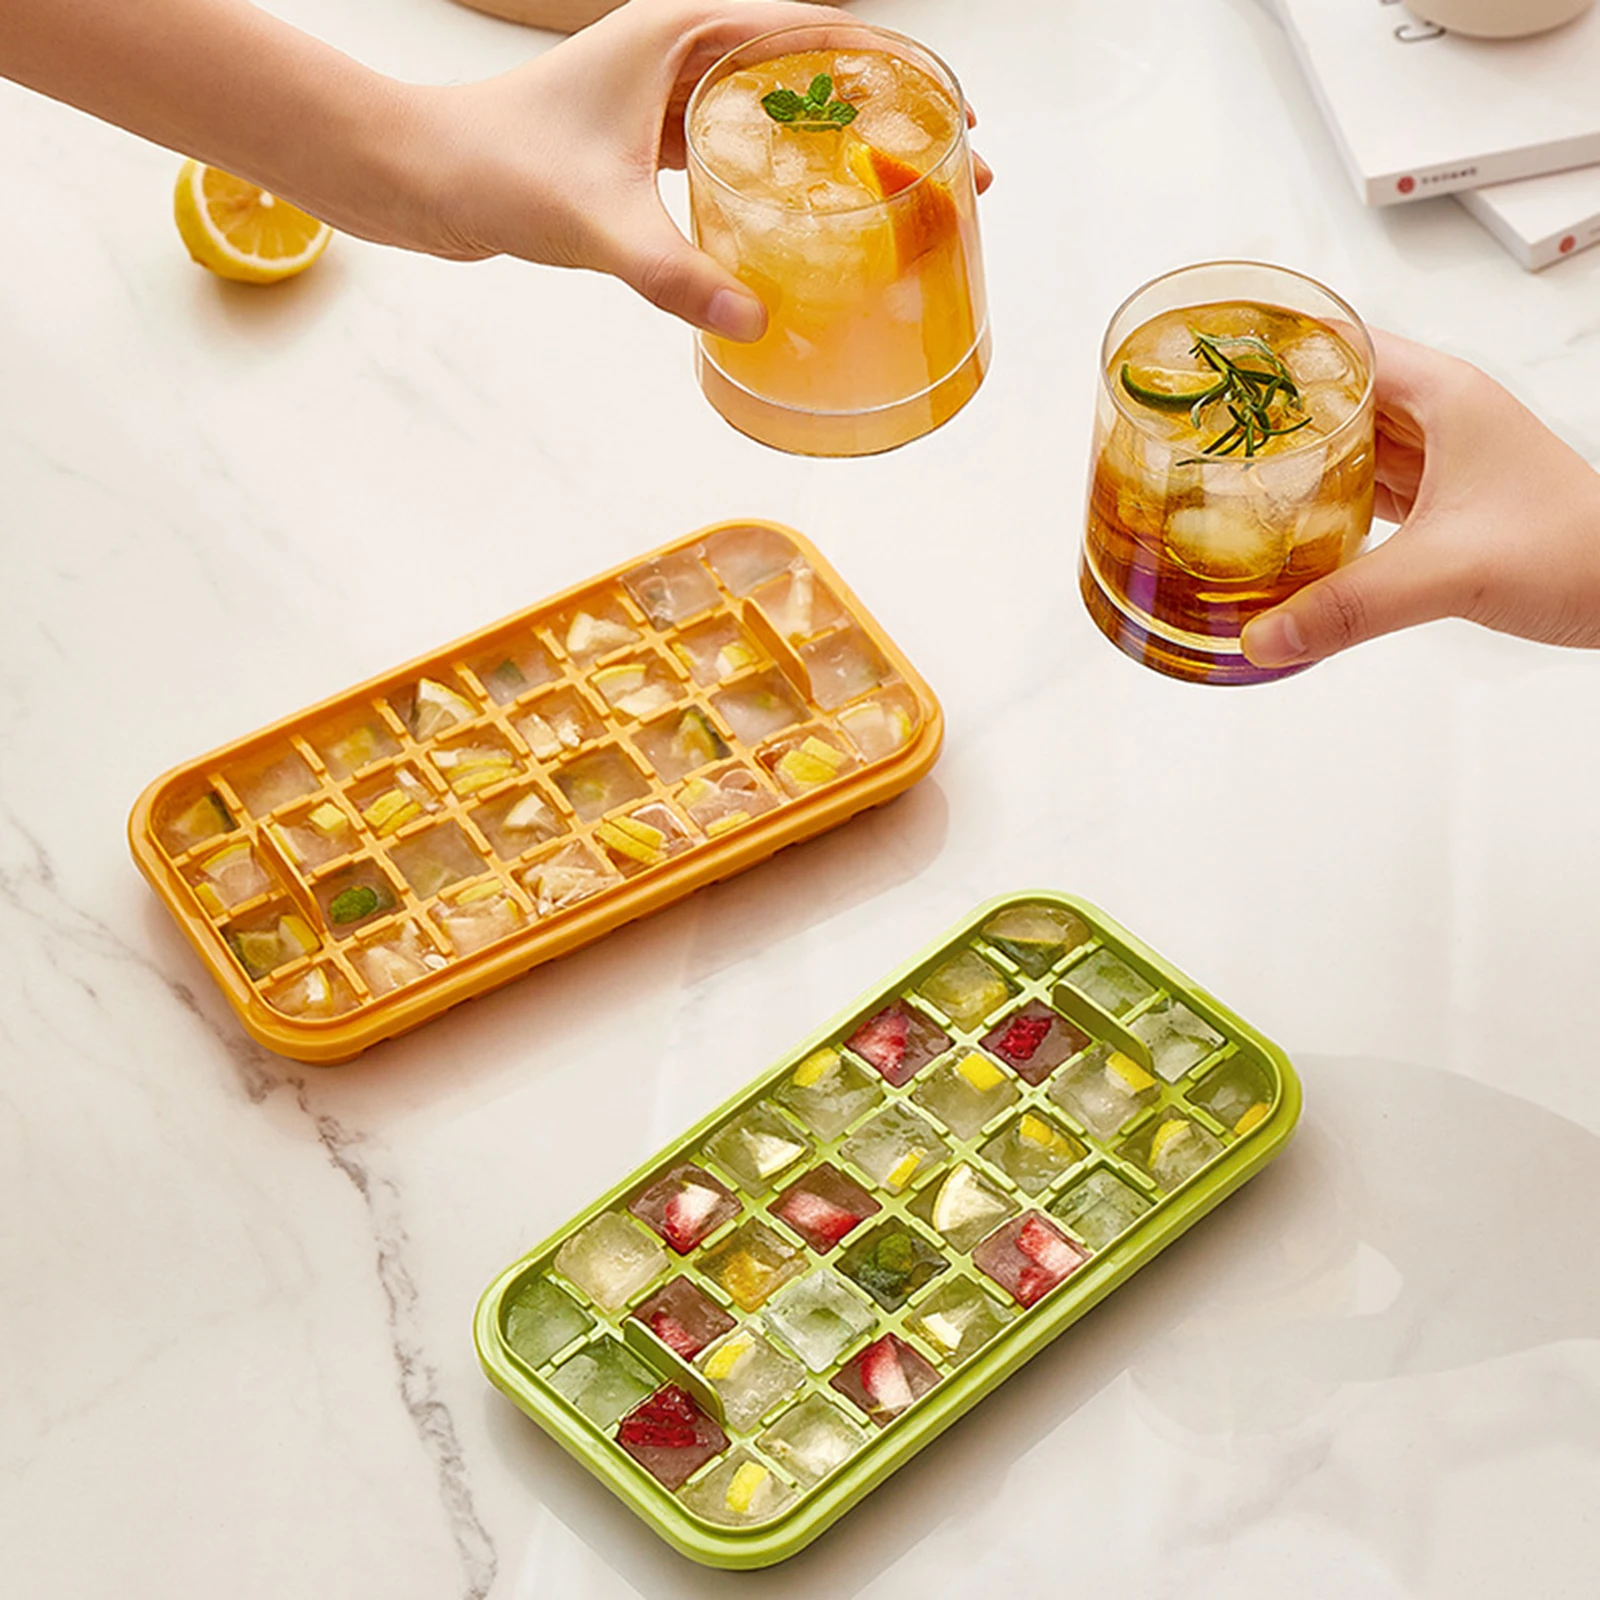 https://ae01.alicdn.com/kf/Sf6d8bc81f8834f6596397ee863d5058cx/Ice-Cube-Maker-With-Storage-Box-Reusable-BPA-Free-Ice-Cube-Molds-with-Lid-and-Ice.jpg